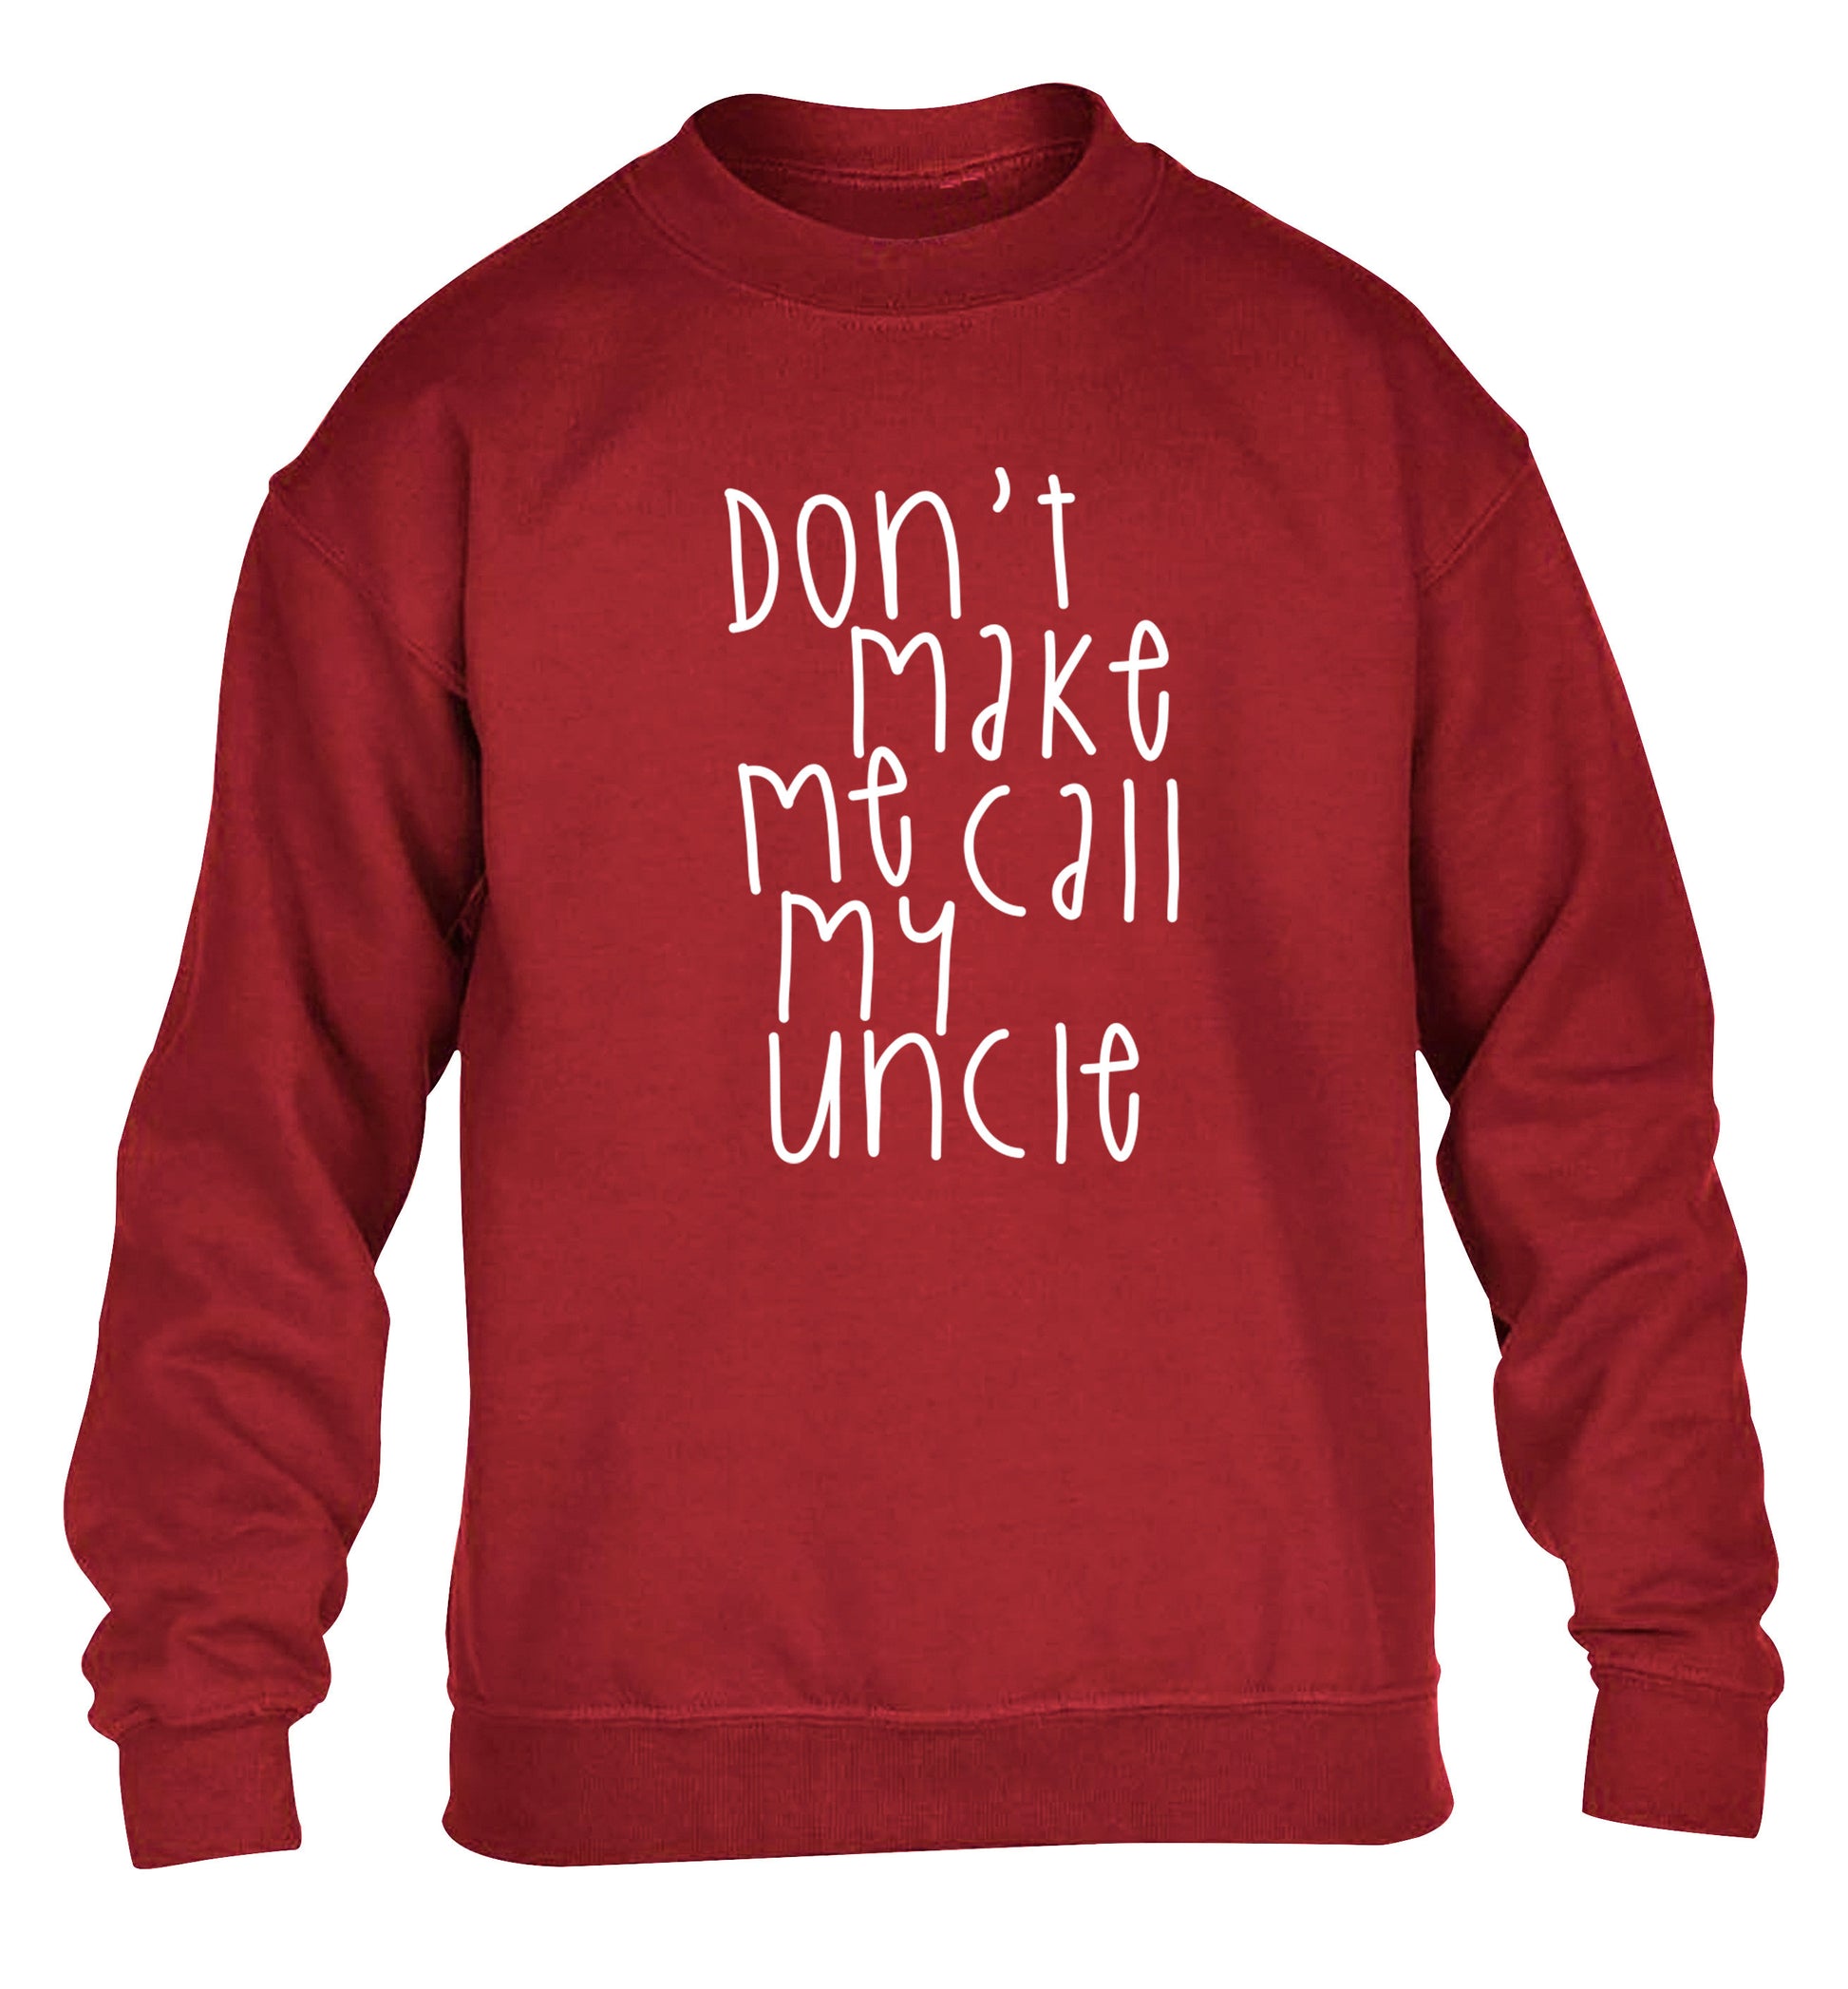 Don't make me call my uncle children's grey sweater 12-14 Years